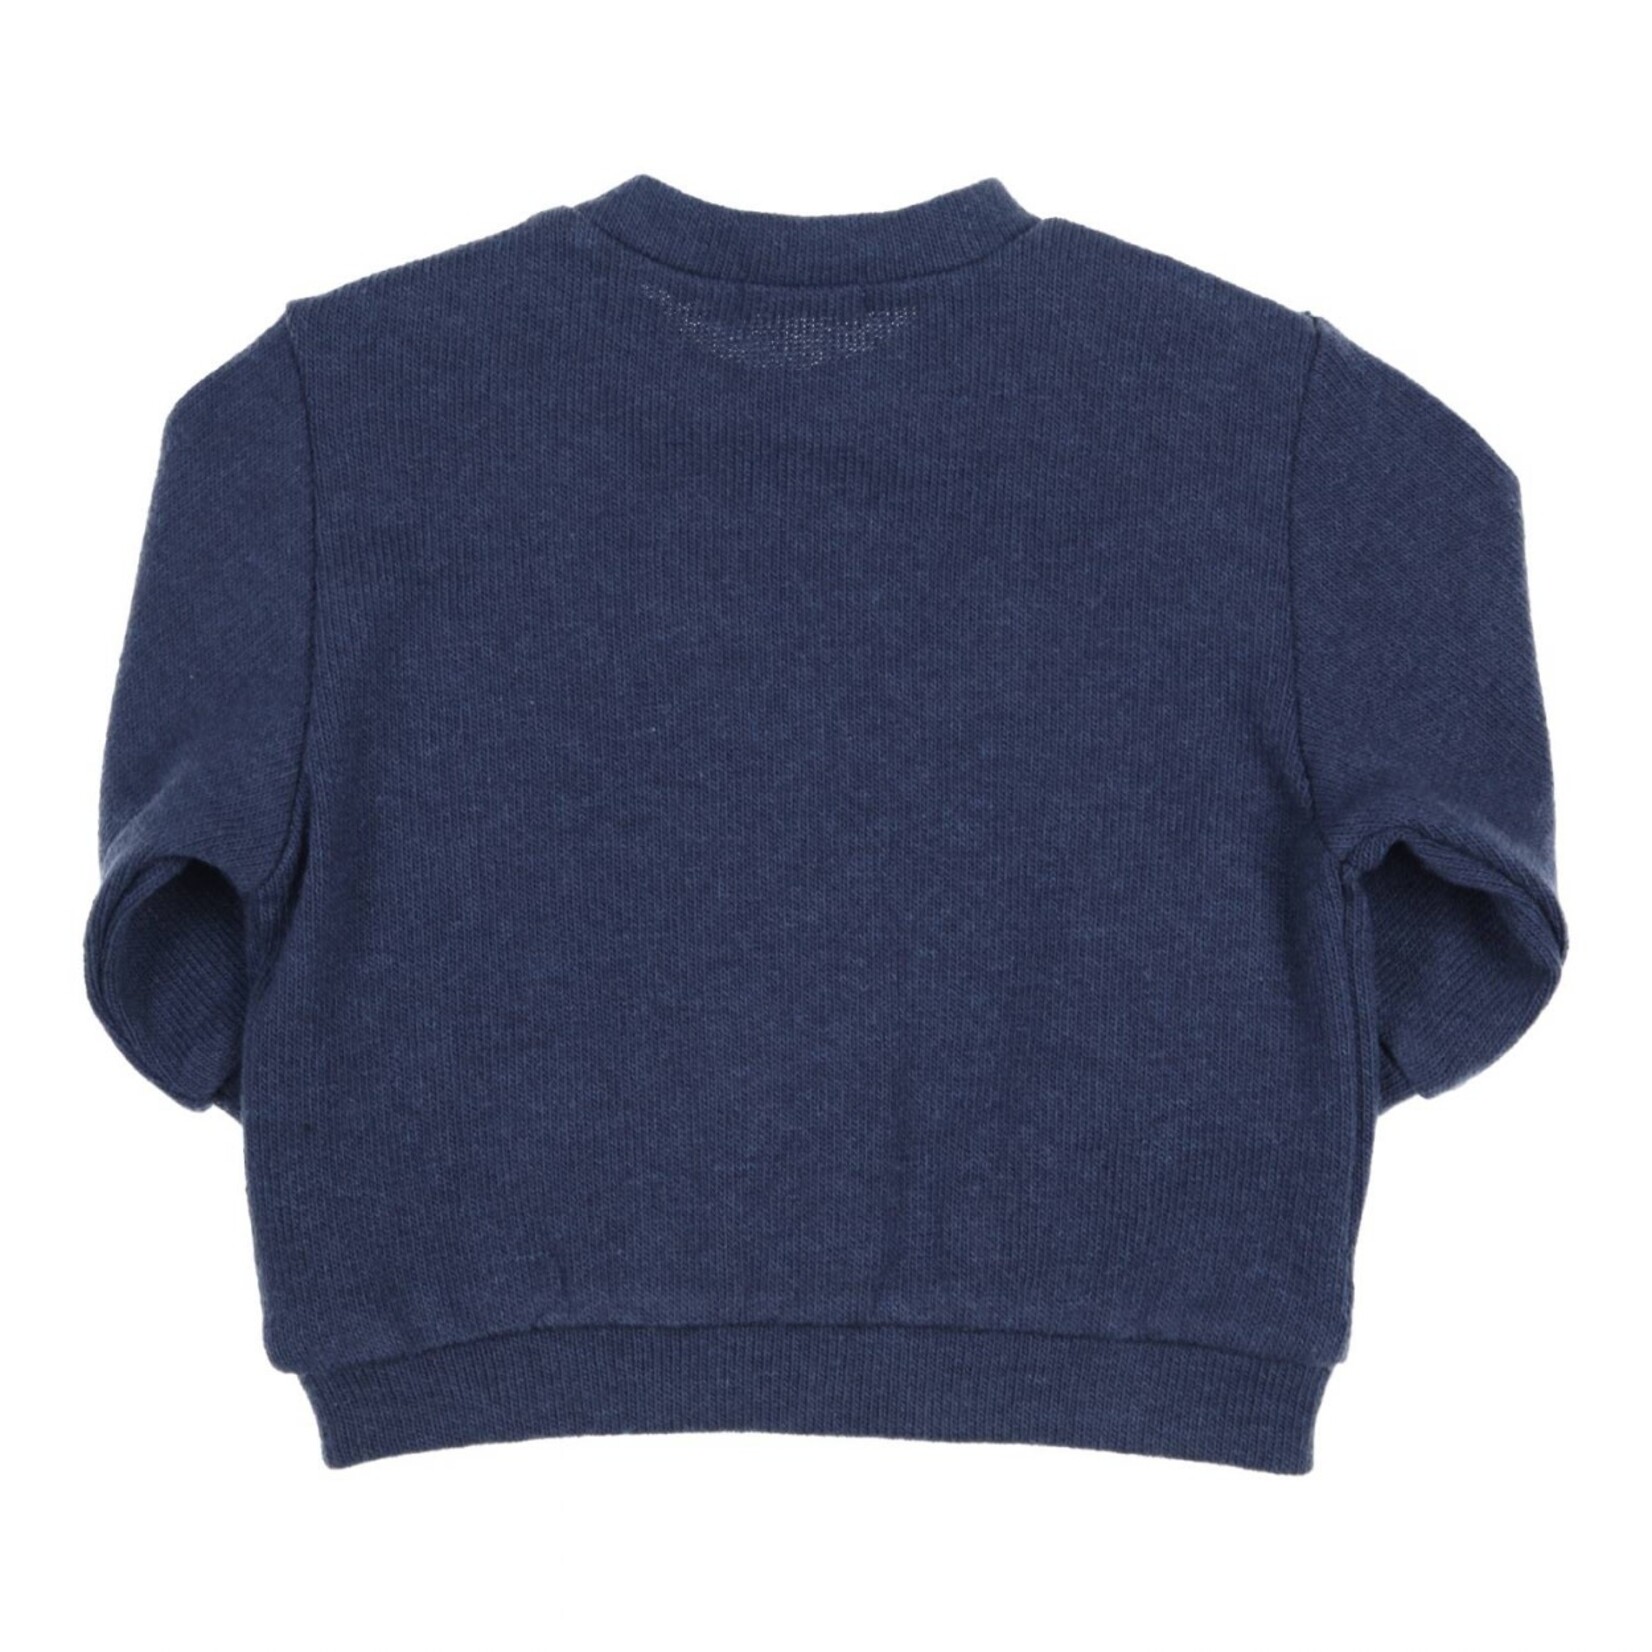 Gymp Pullover Gilles_Navy_24